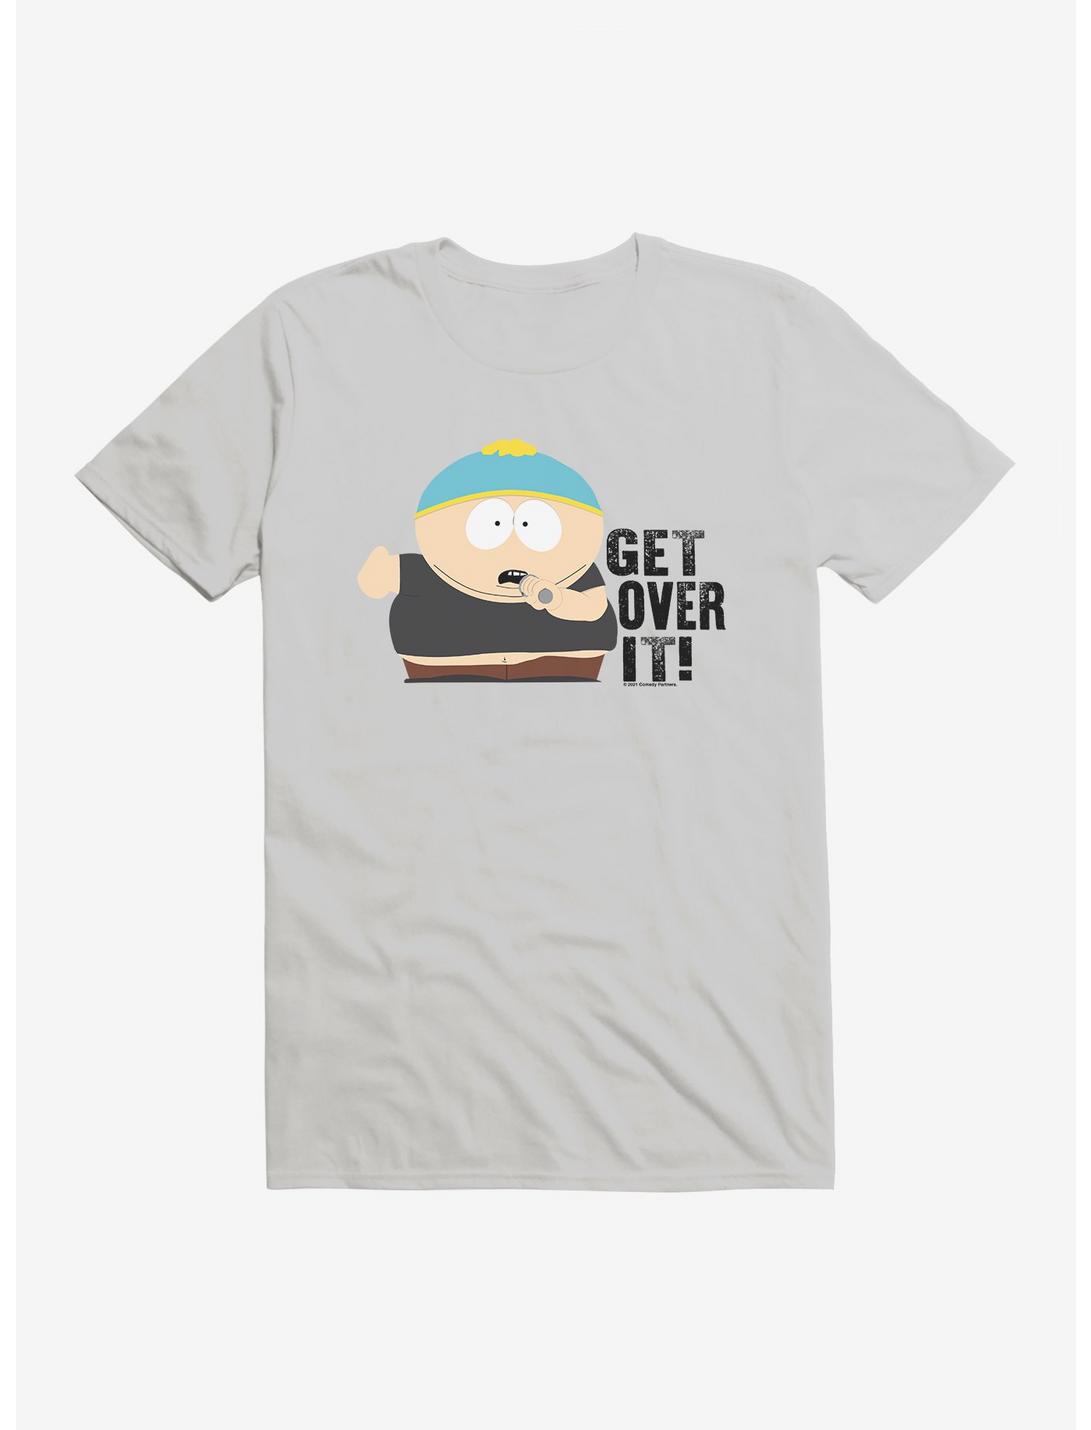 South Park Season Reference Cartman Over It T-Shirt, SILVER, hi-res